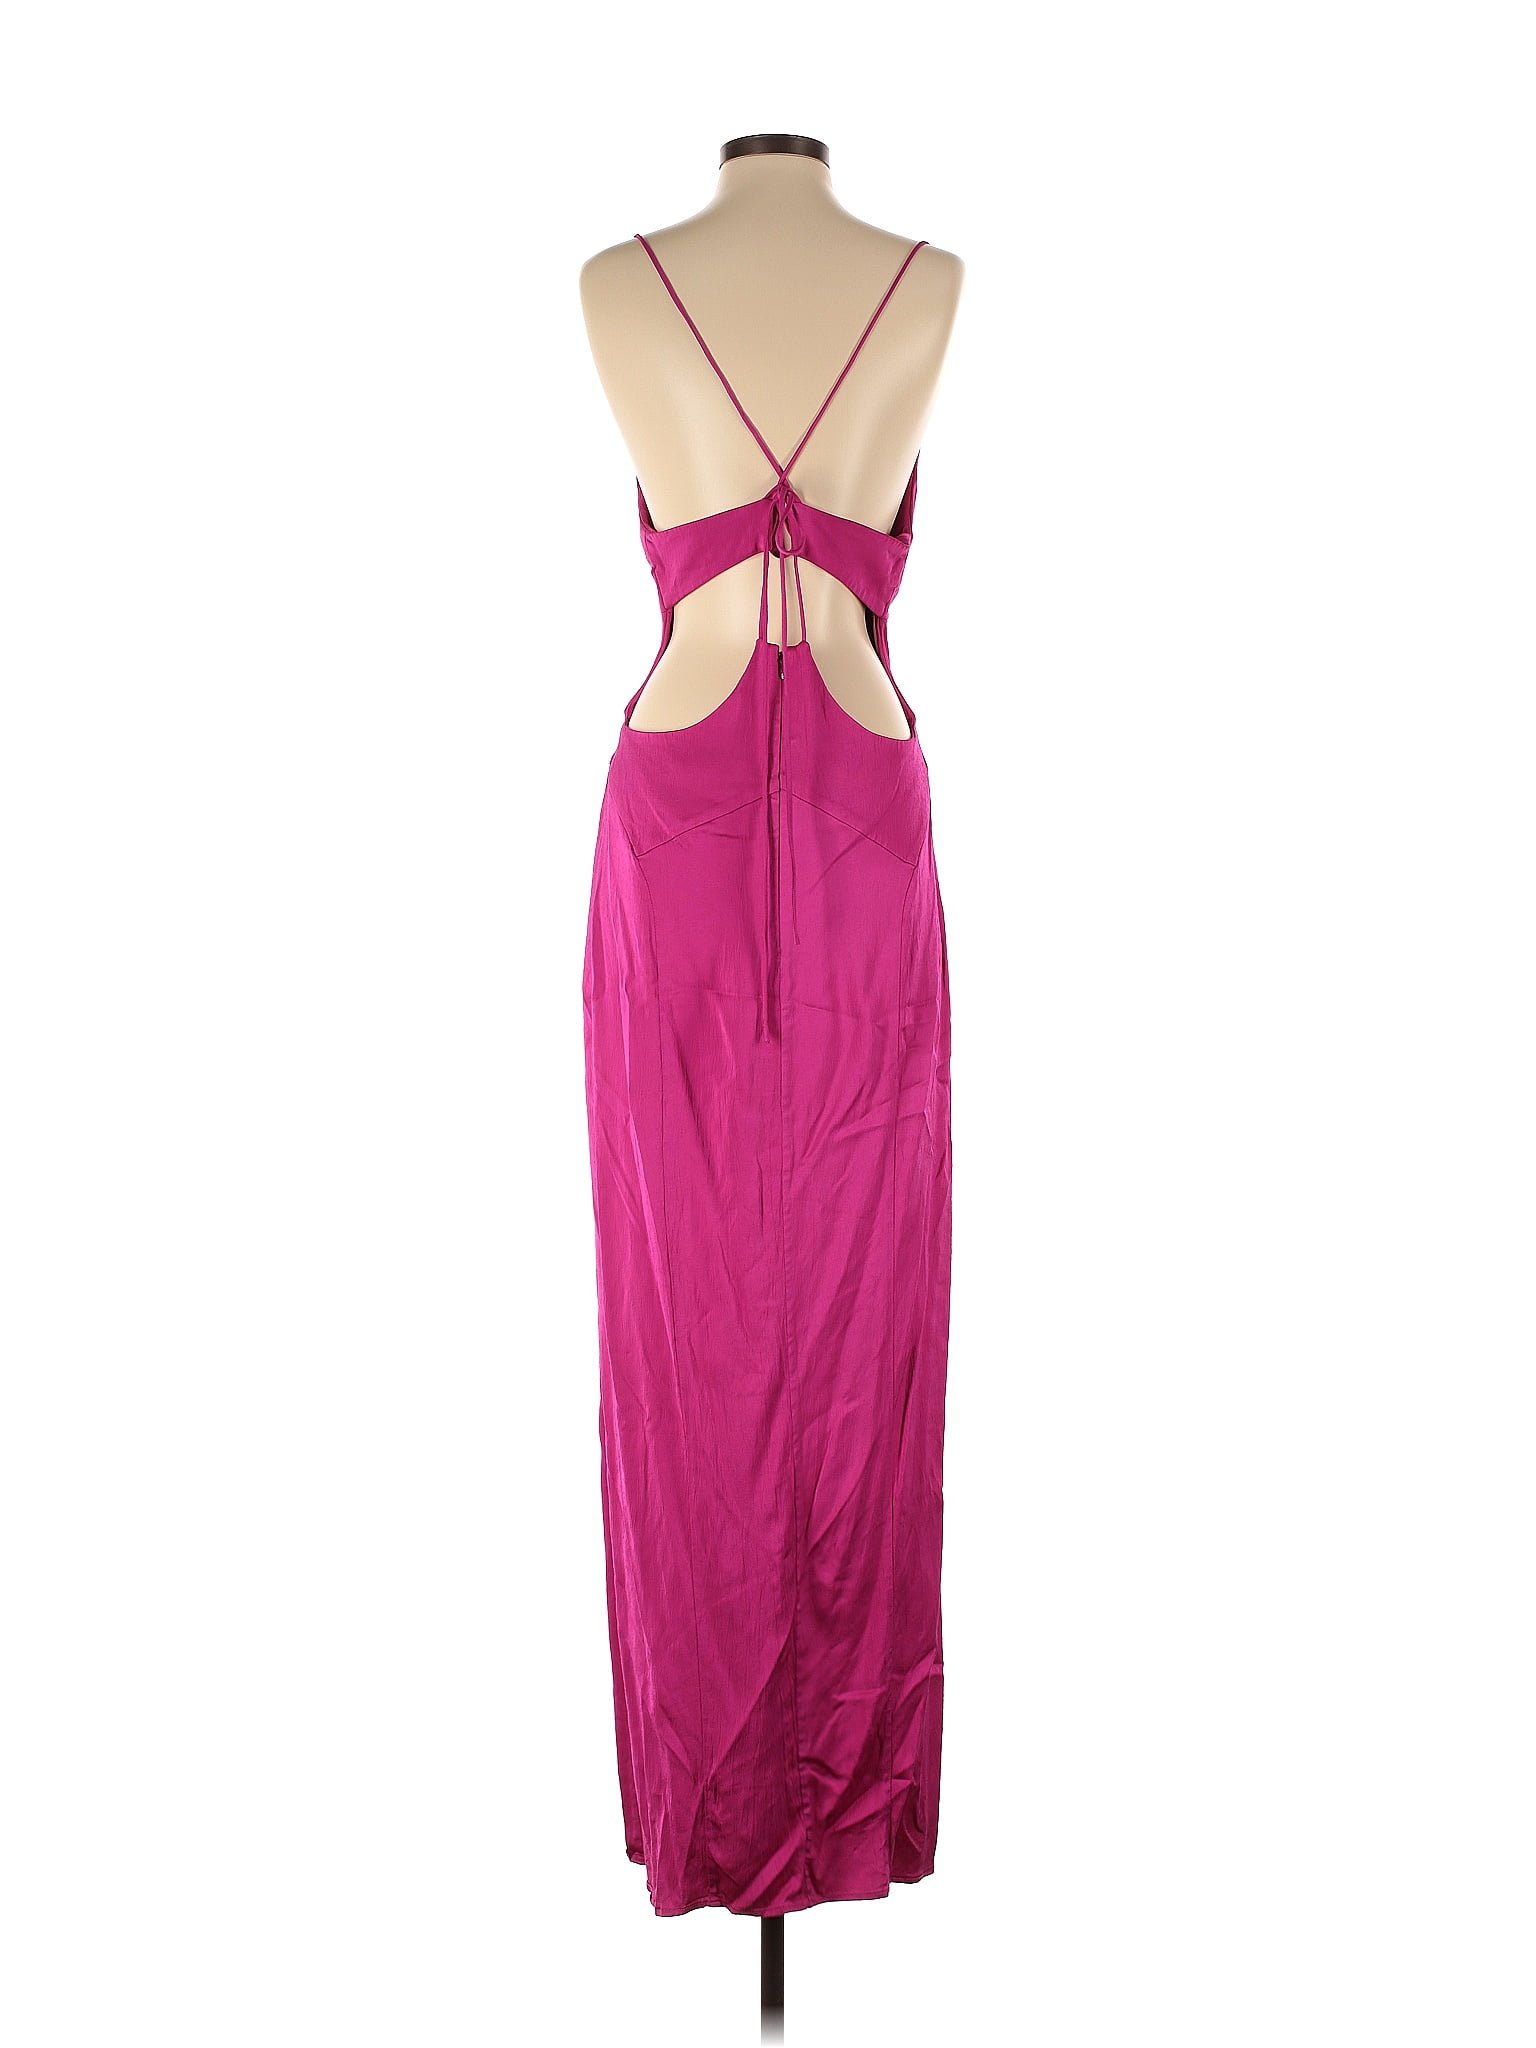 Facetime Slip Gown by Manning Cartell for $70